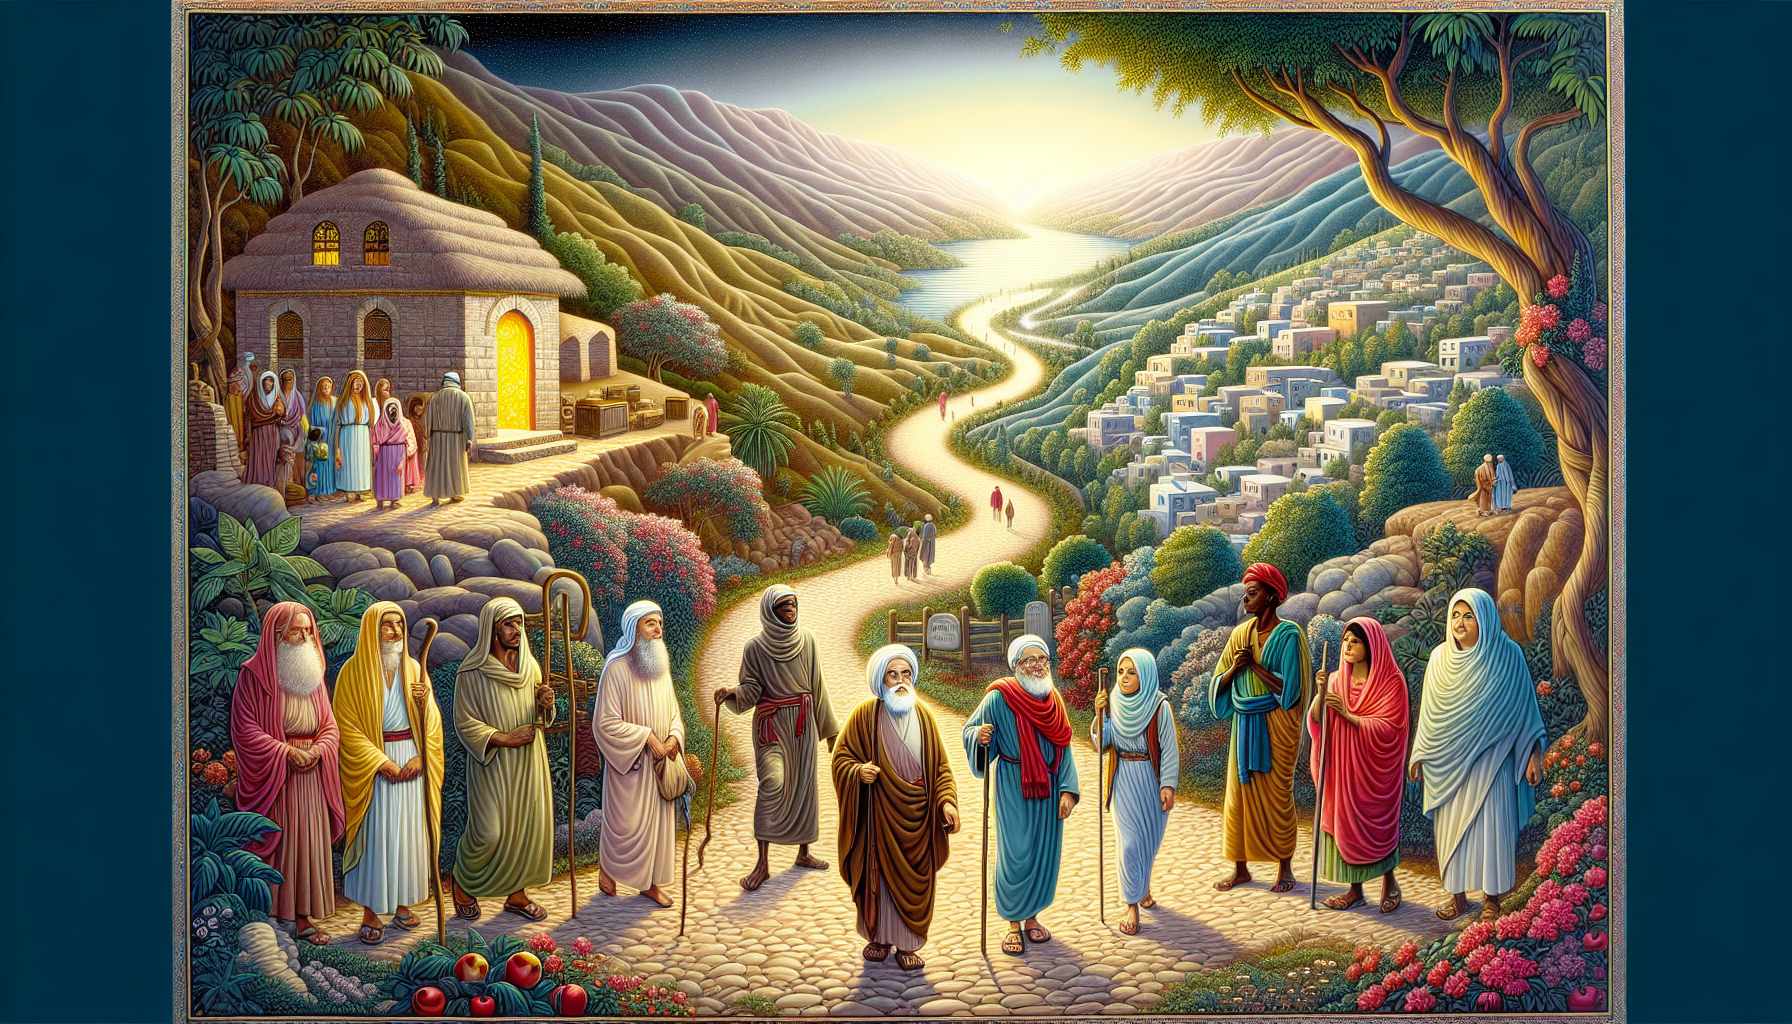 Visual depiction of a serene, ancient Middle Eastern landscape with a path leading from a small village to a hilltop, symbolizing the passage mentioned in John 14:6, with ethereal light illuminating t